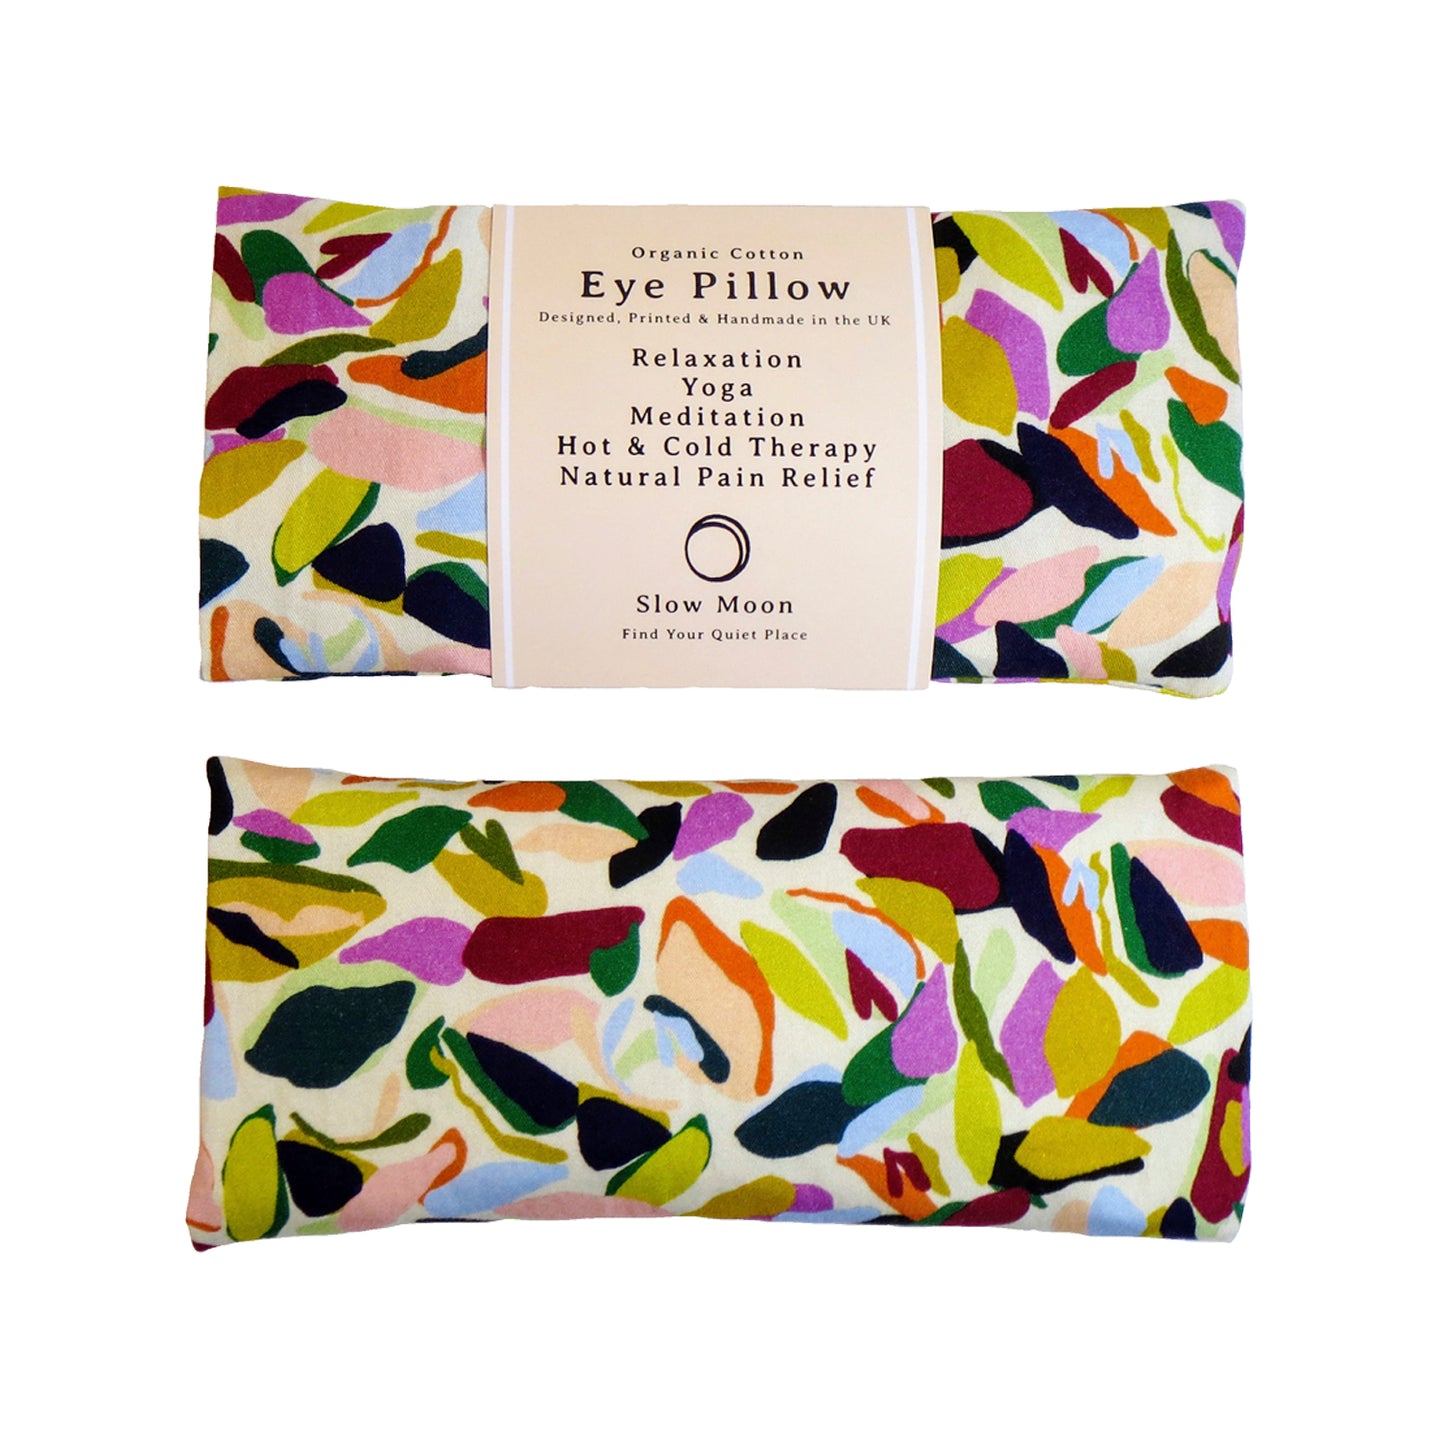 Organic Cotton Pebbles Heated I Cooled Eye Pillow